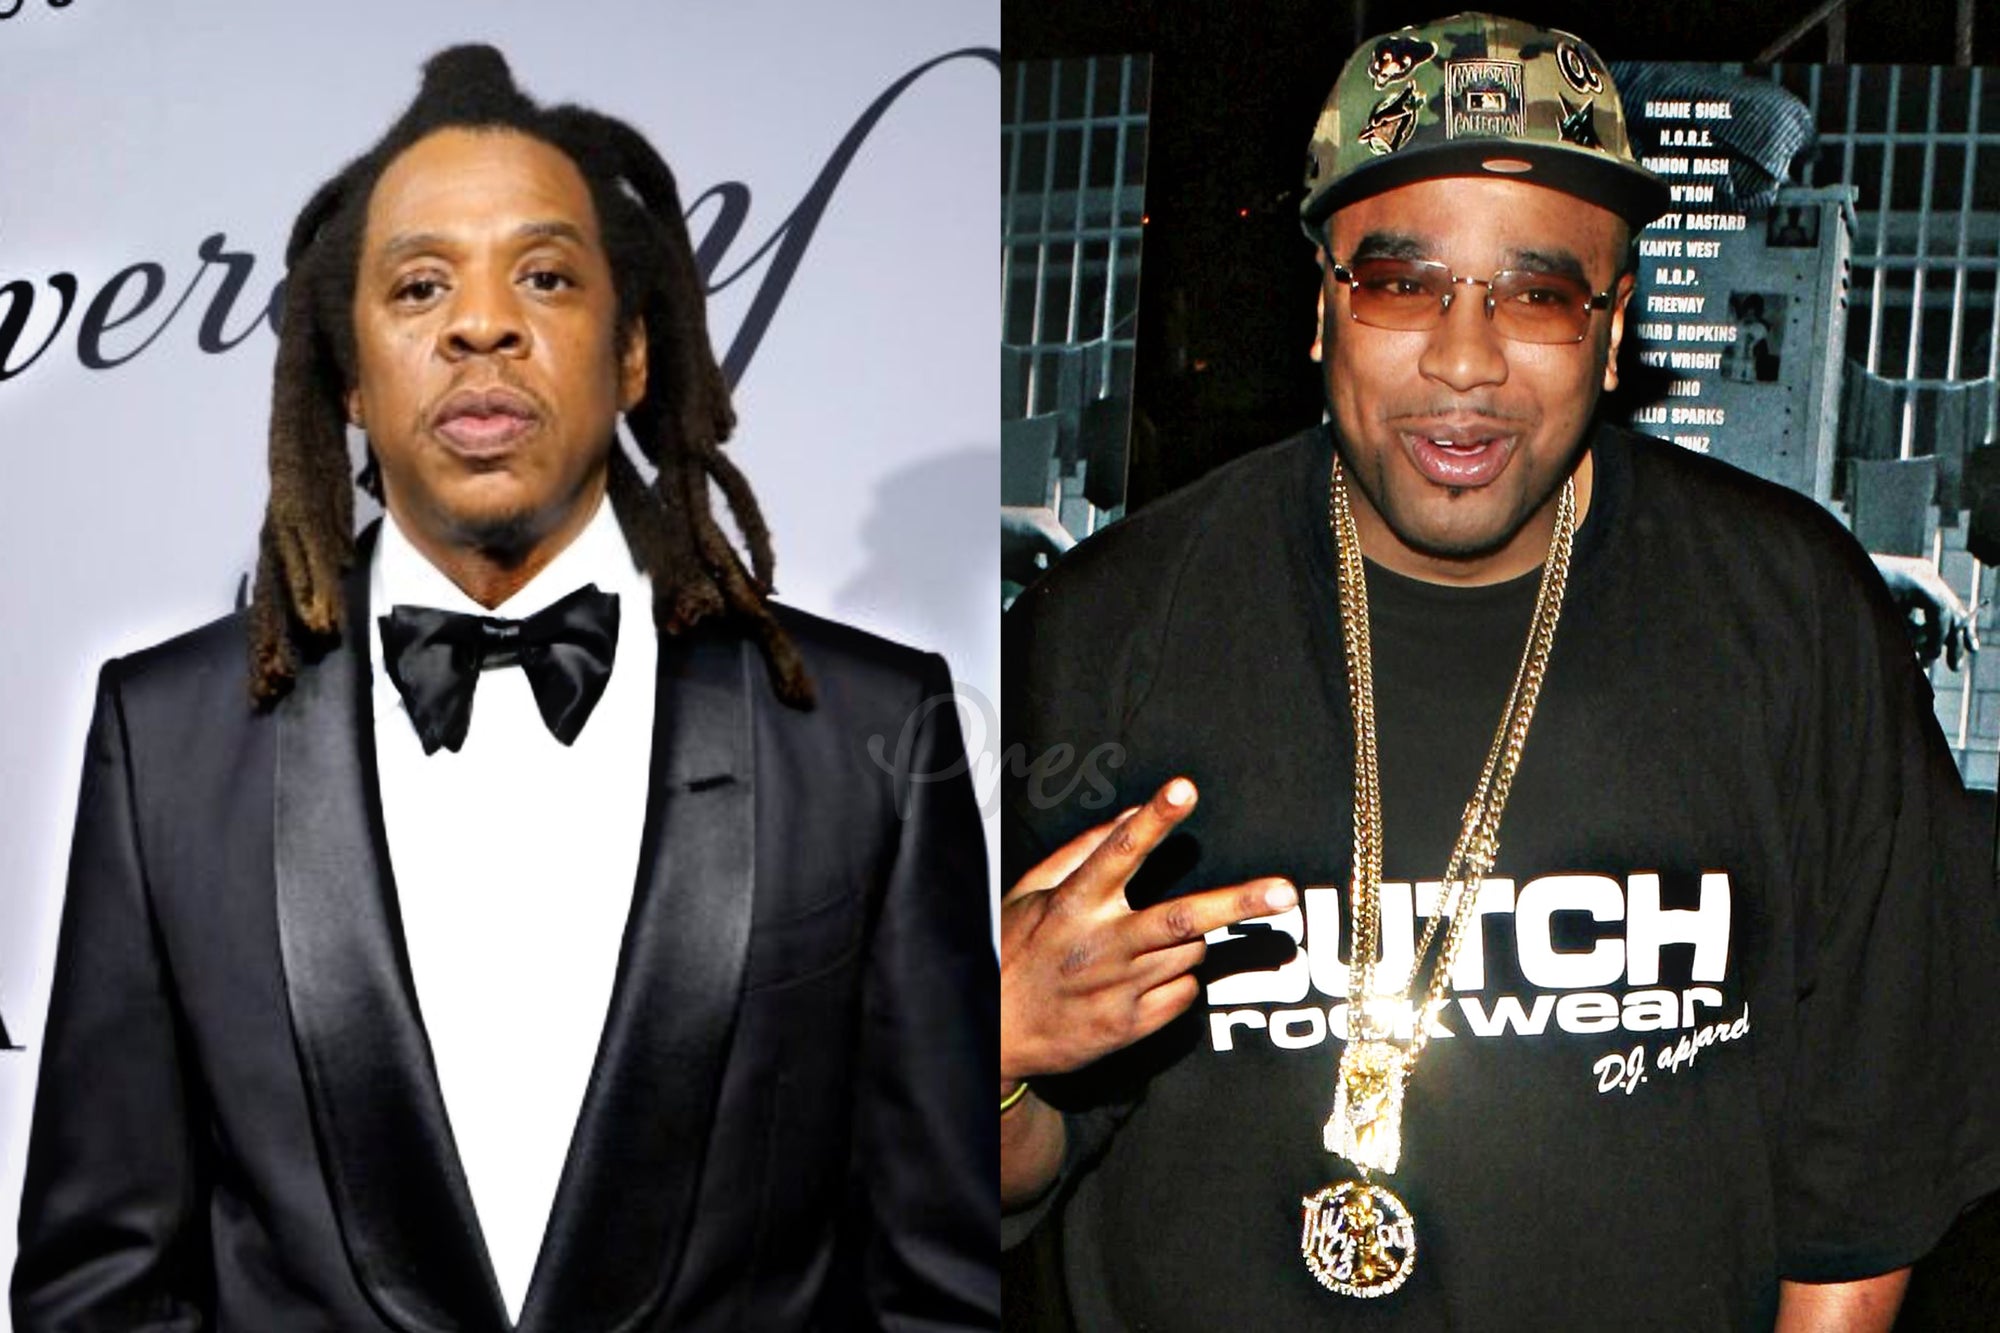 N.O.R.E. Says He Doesn’t Buy Watches Without Consulting Jay-Z First - Pres